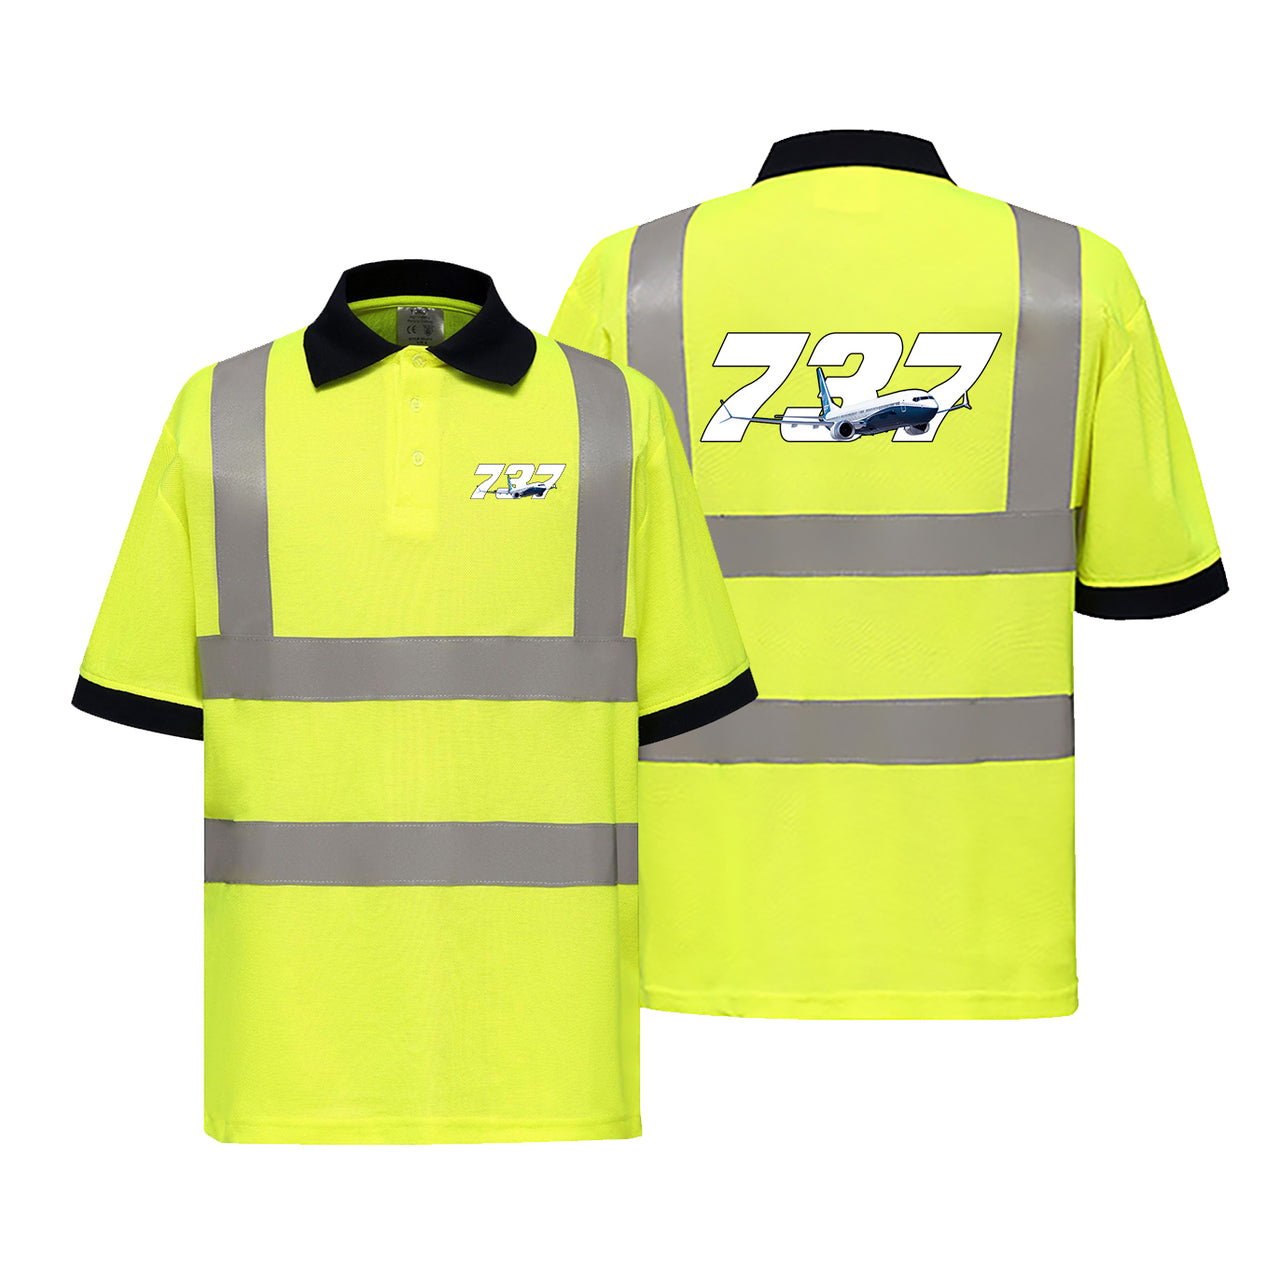 Super Boeing 737 Designed Reflective Polo T-Shirts